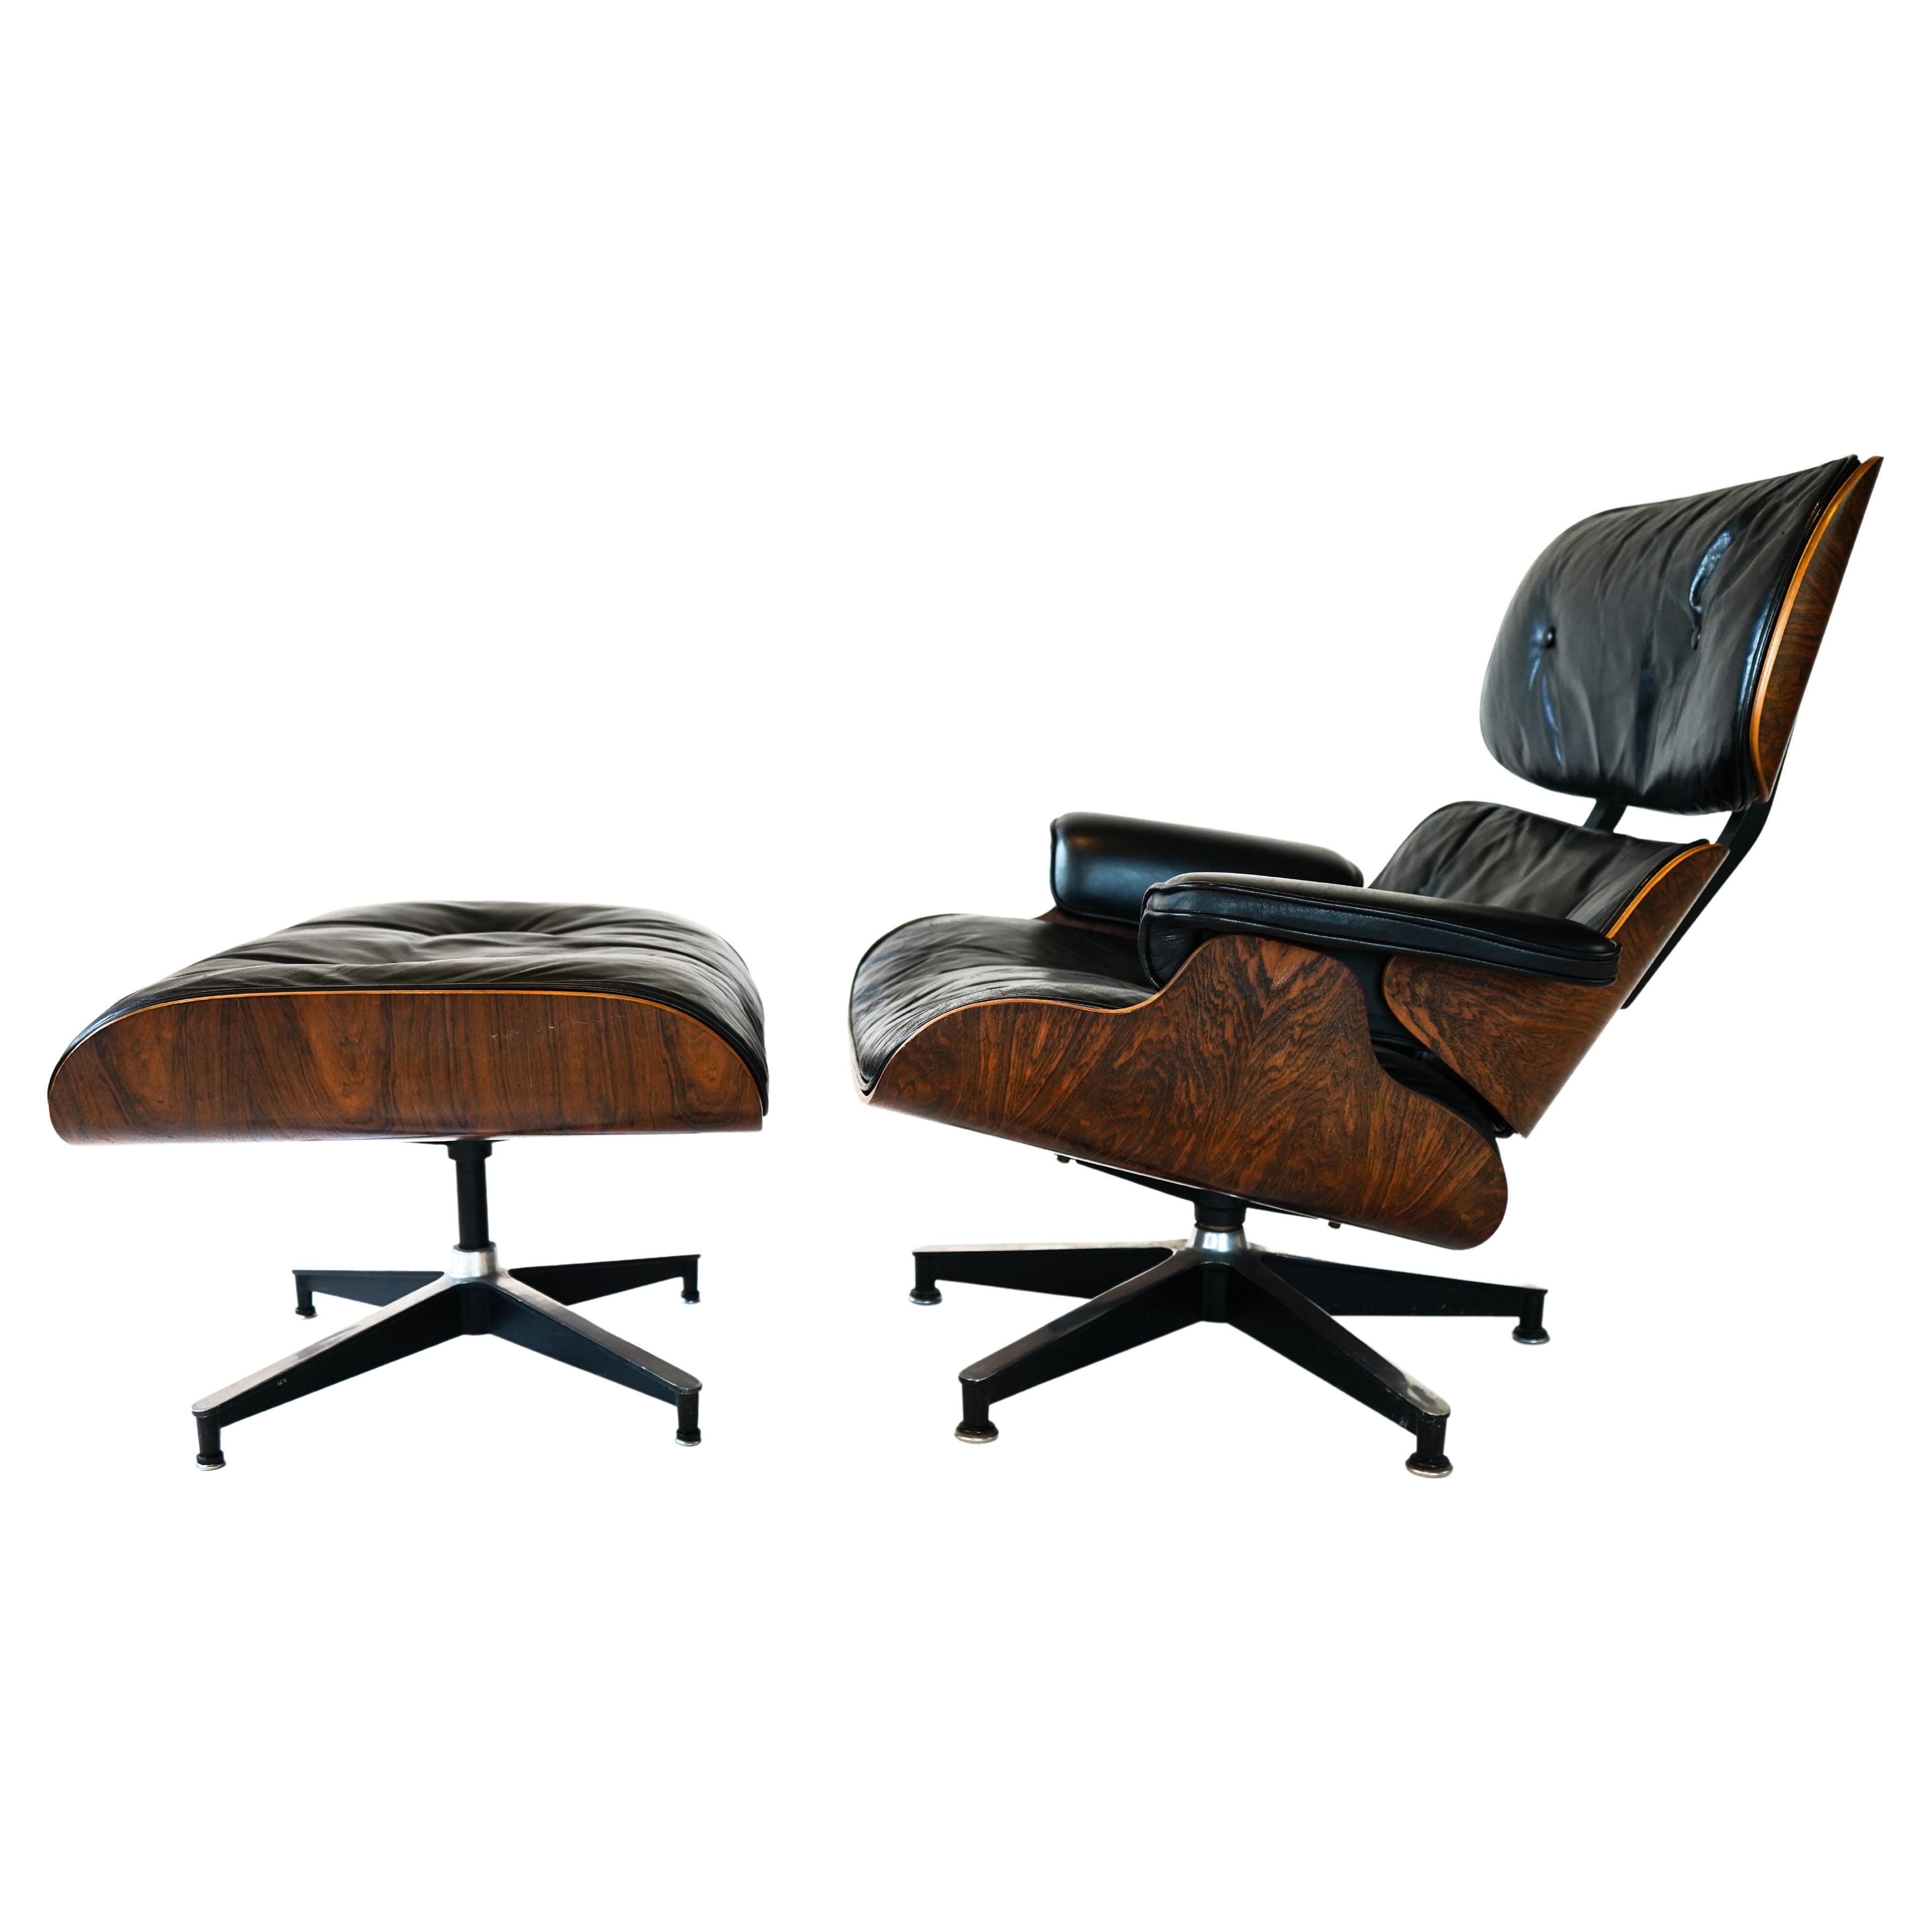 Vintage 1960's Herman Miller Eames Lounge and Ottoman 670 & 671. A very nice, all original example. The wood is in great condition with no chips or notable issues. The leather has minor normal wear. 

